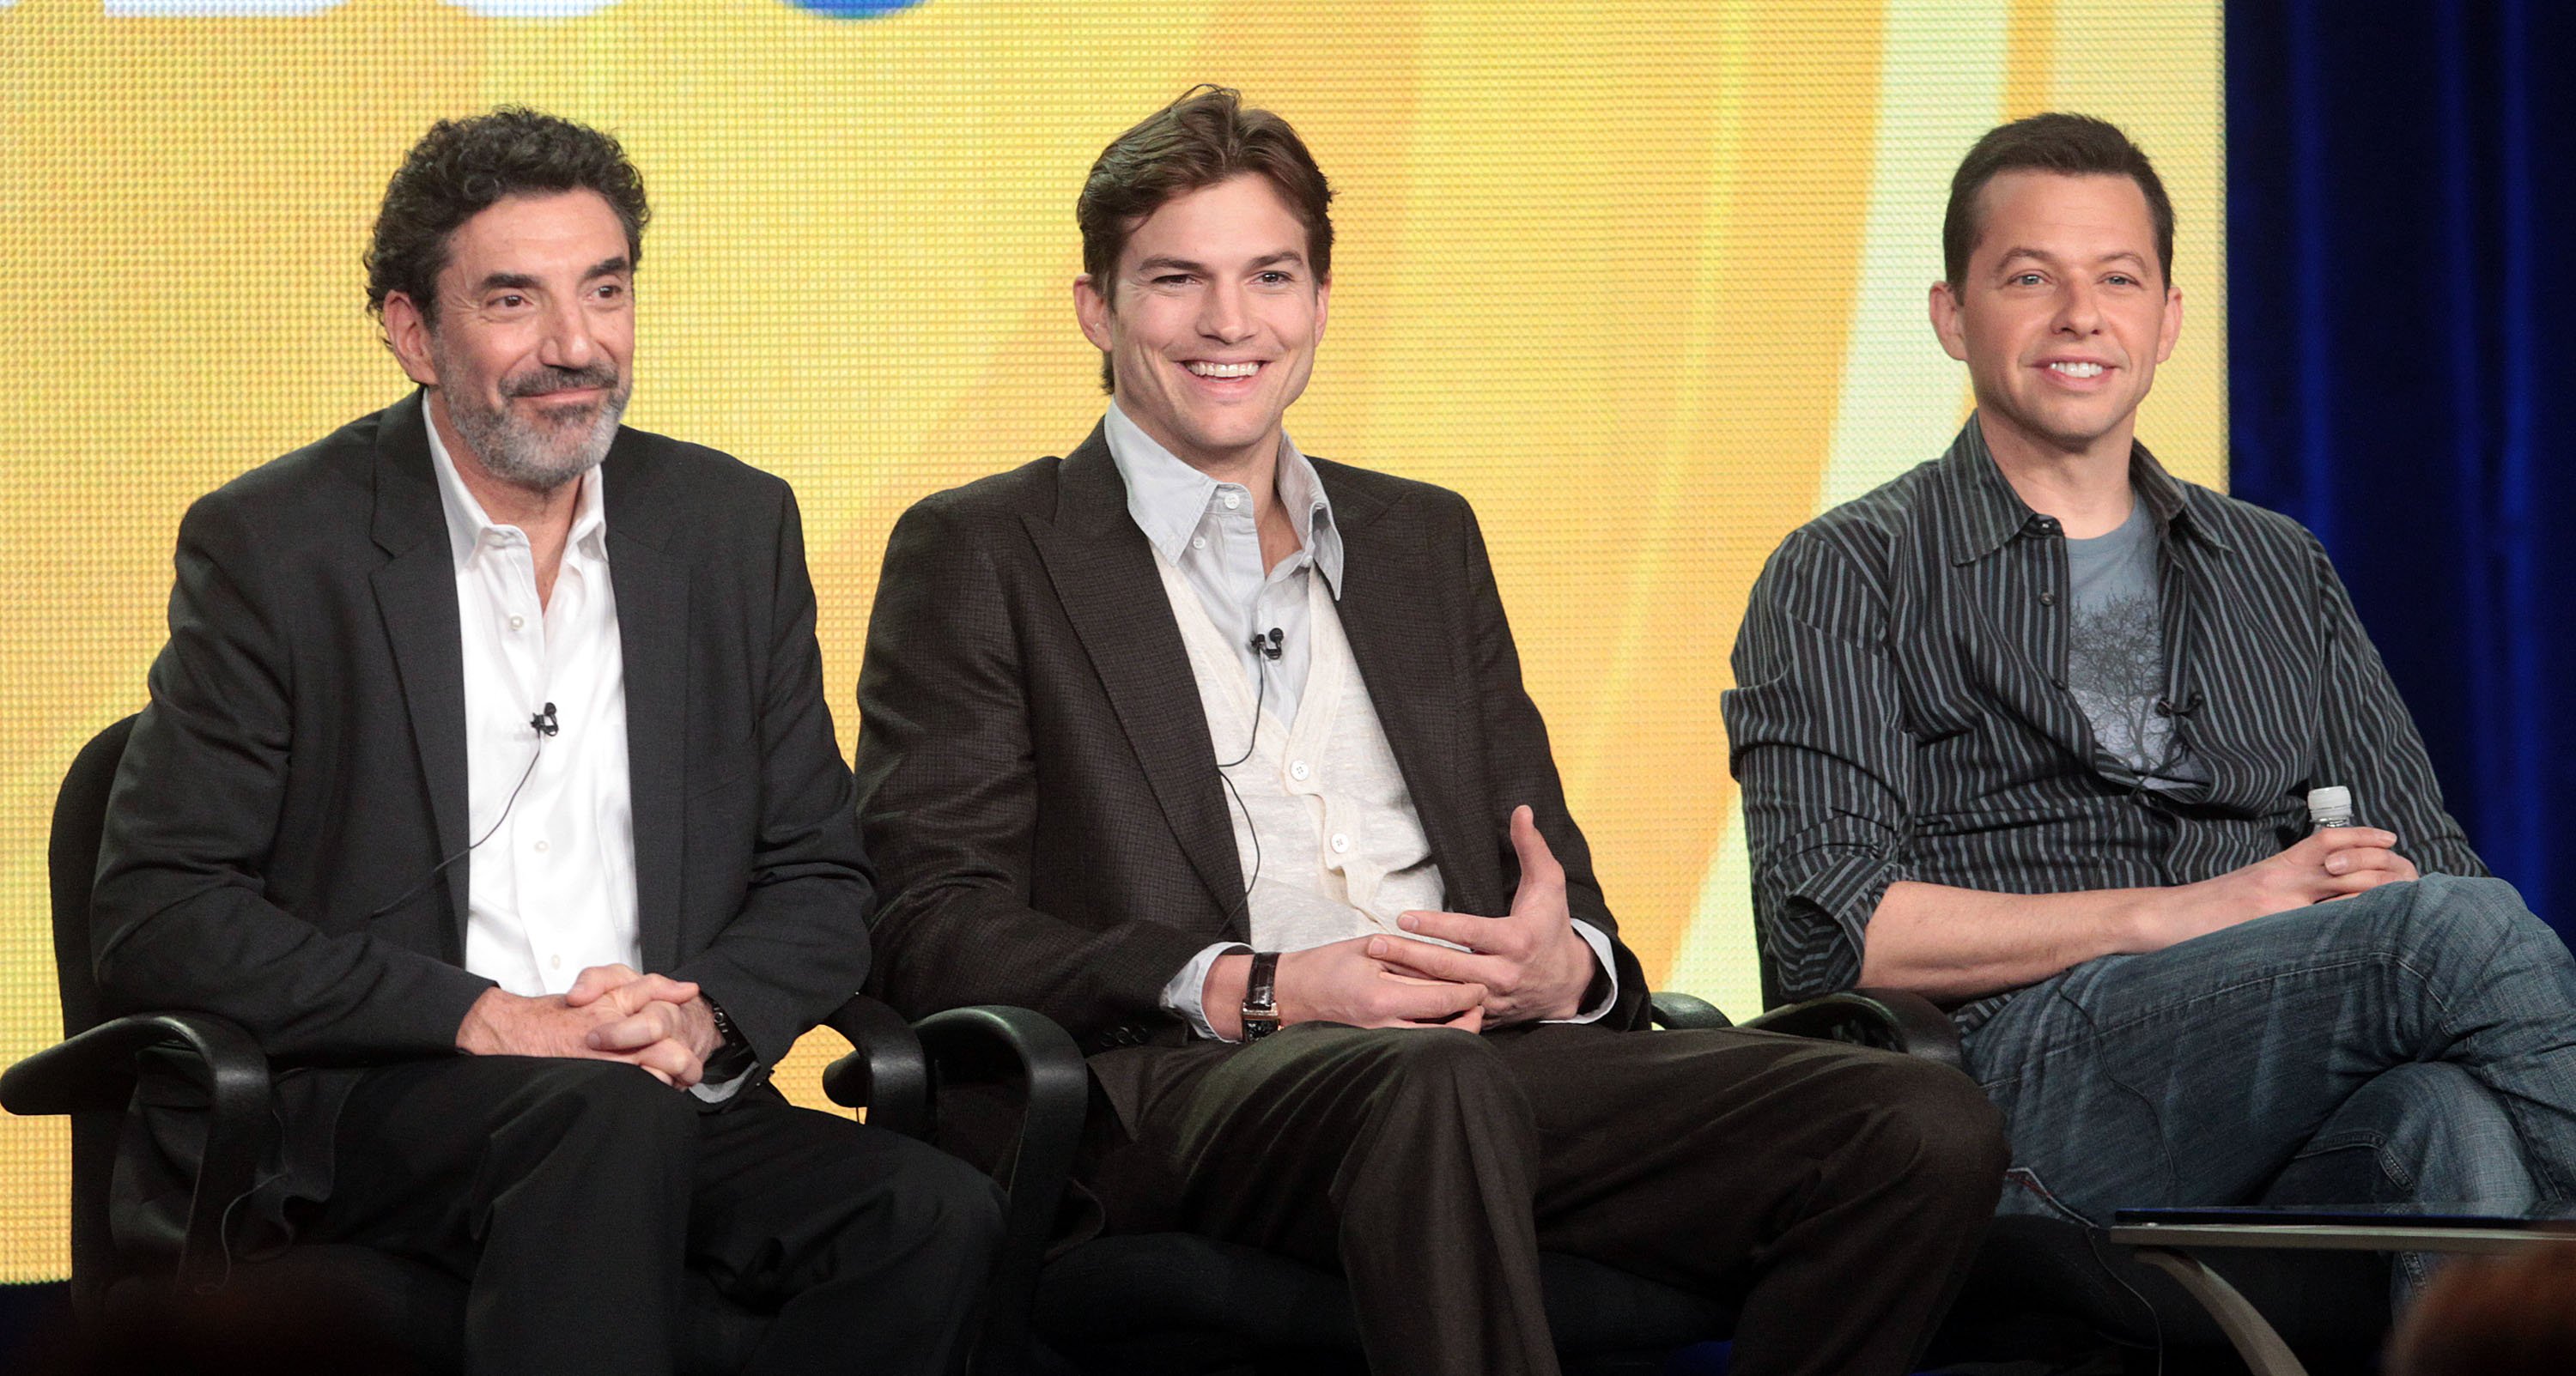 Chuck Lorre sits onstage with Ashton Kutcher and Jon Cryer during the 2012 Television Critics Association Press Tour